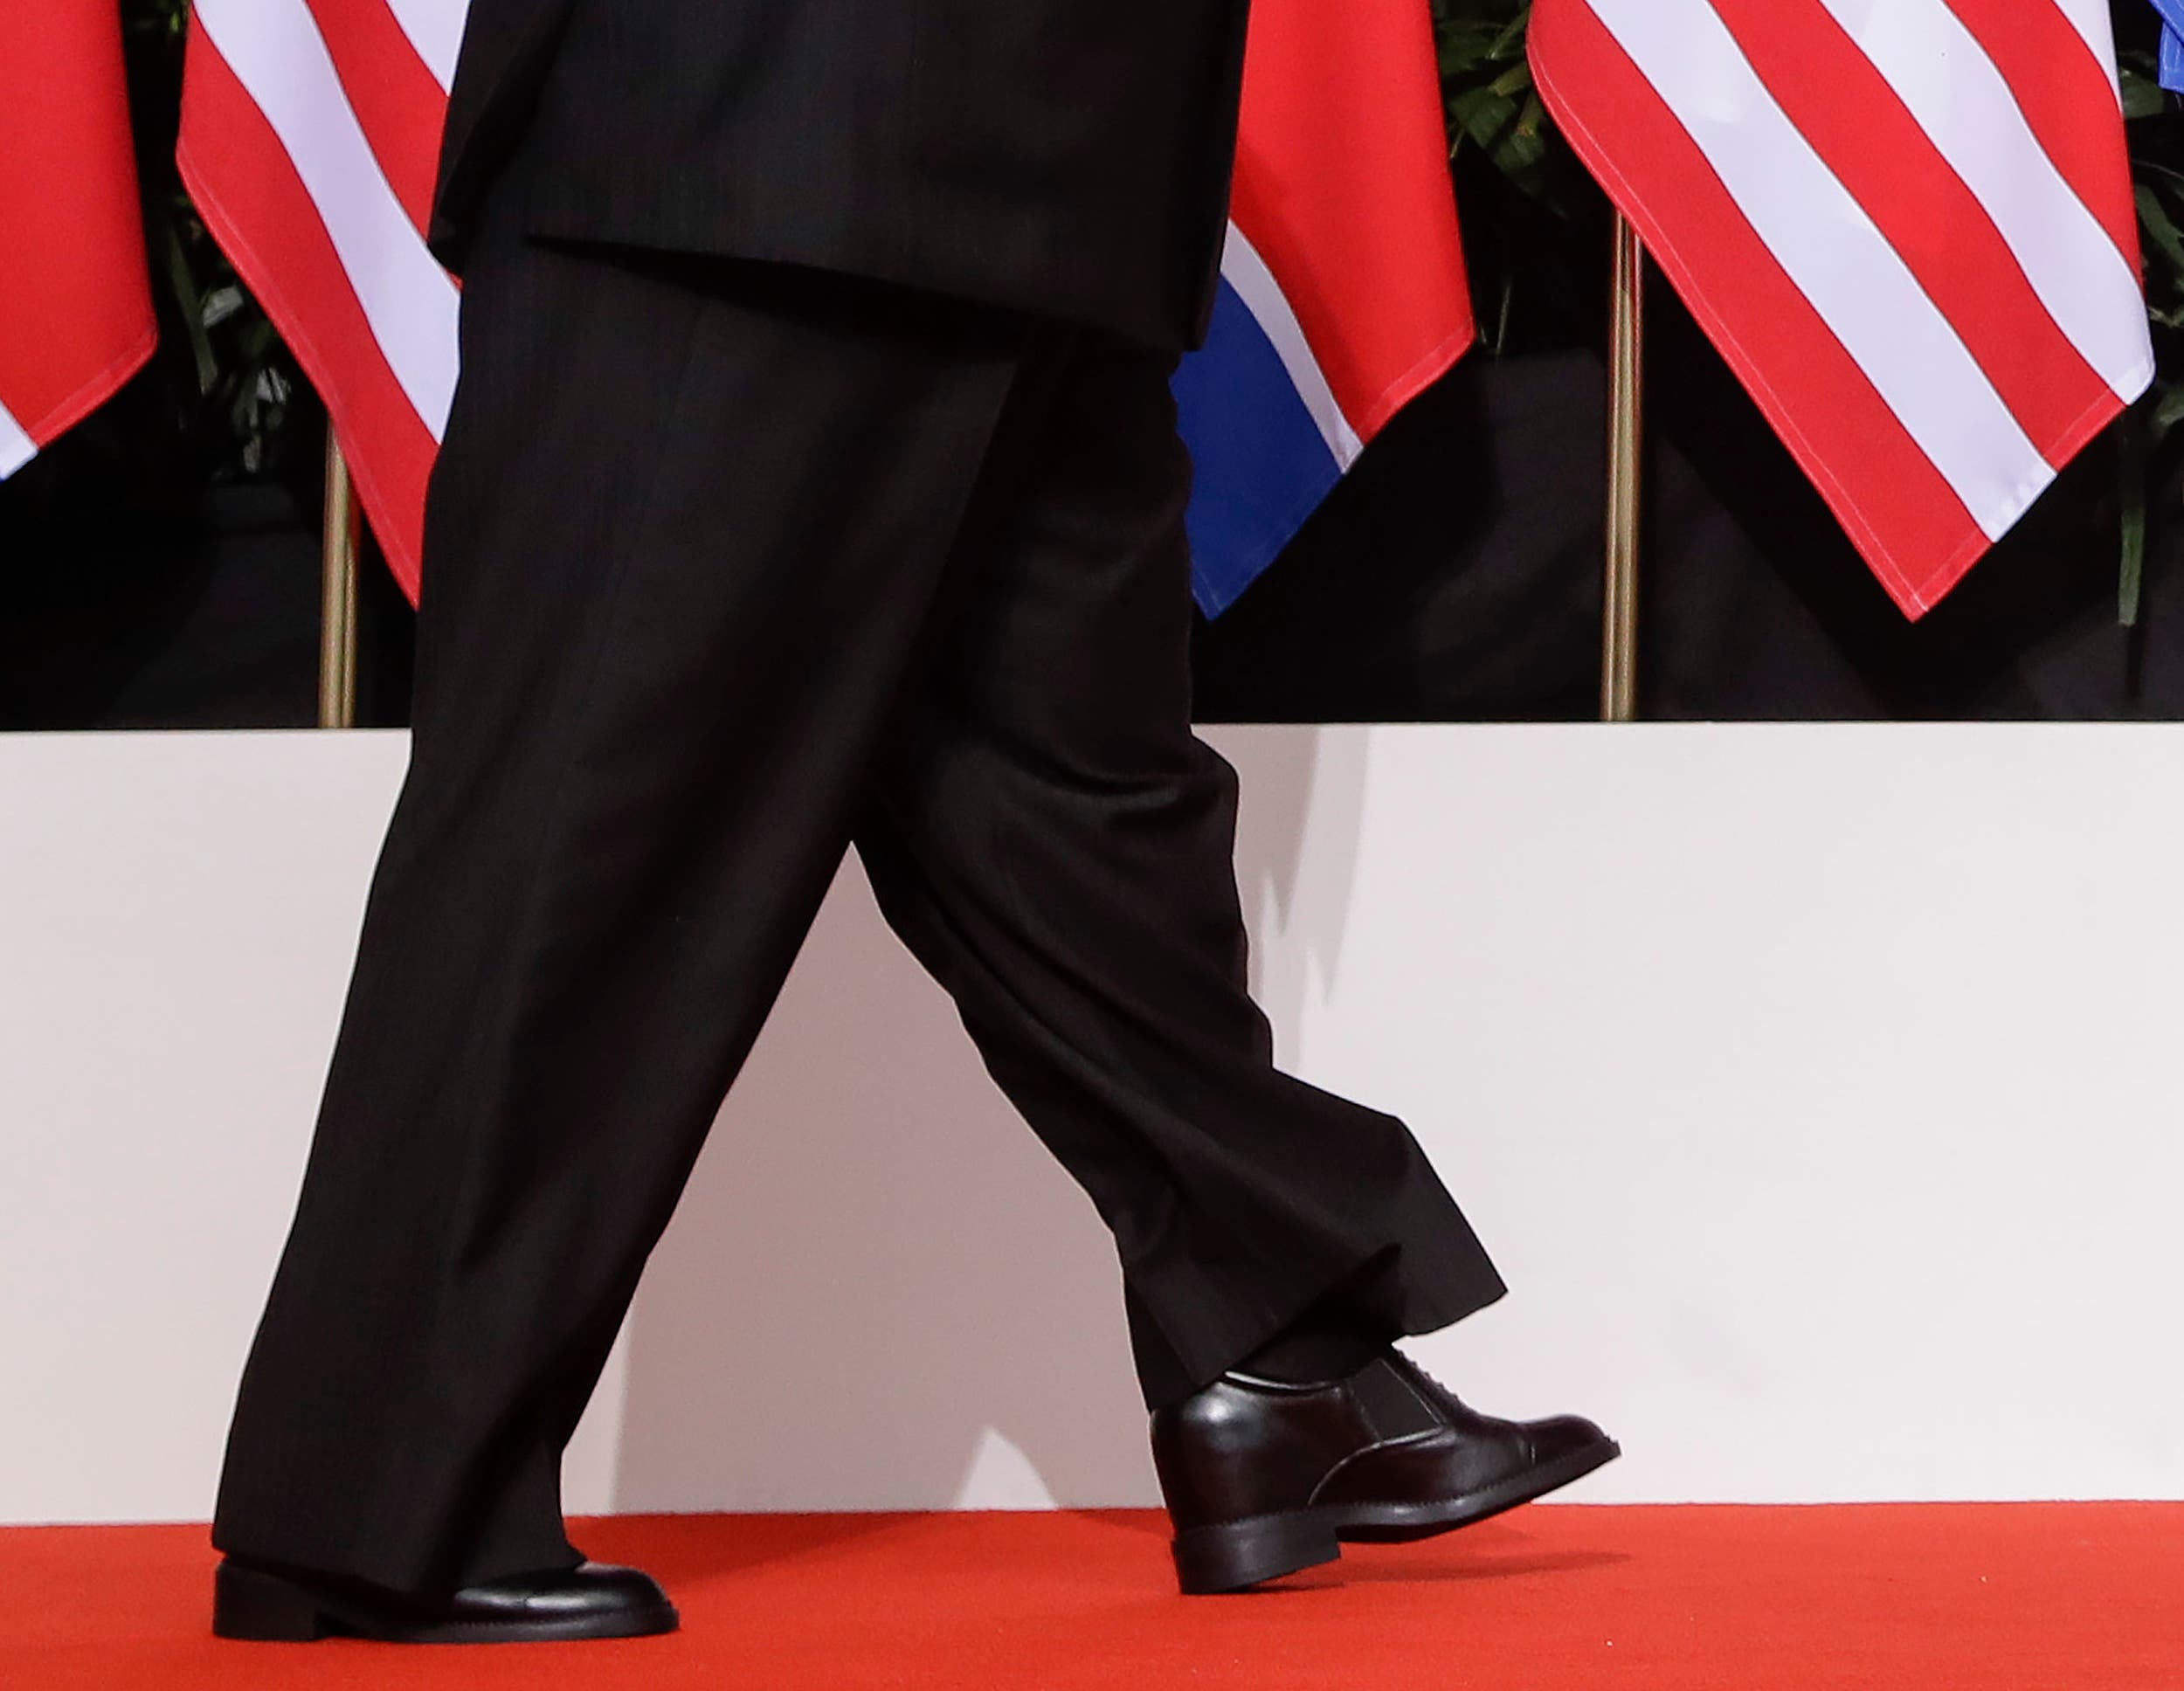 Kim is about 5.8 feet tall, about 7.2 inches shorter than Trump. But when the two stood together, the difference in their heights wasn’t that noticeable. (AP)